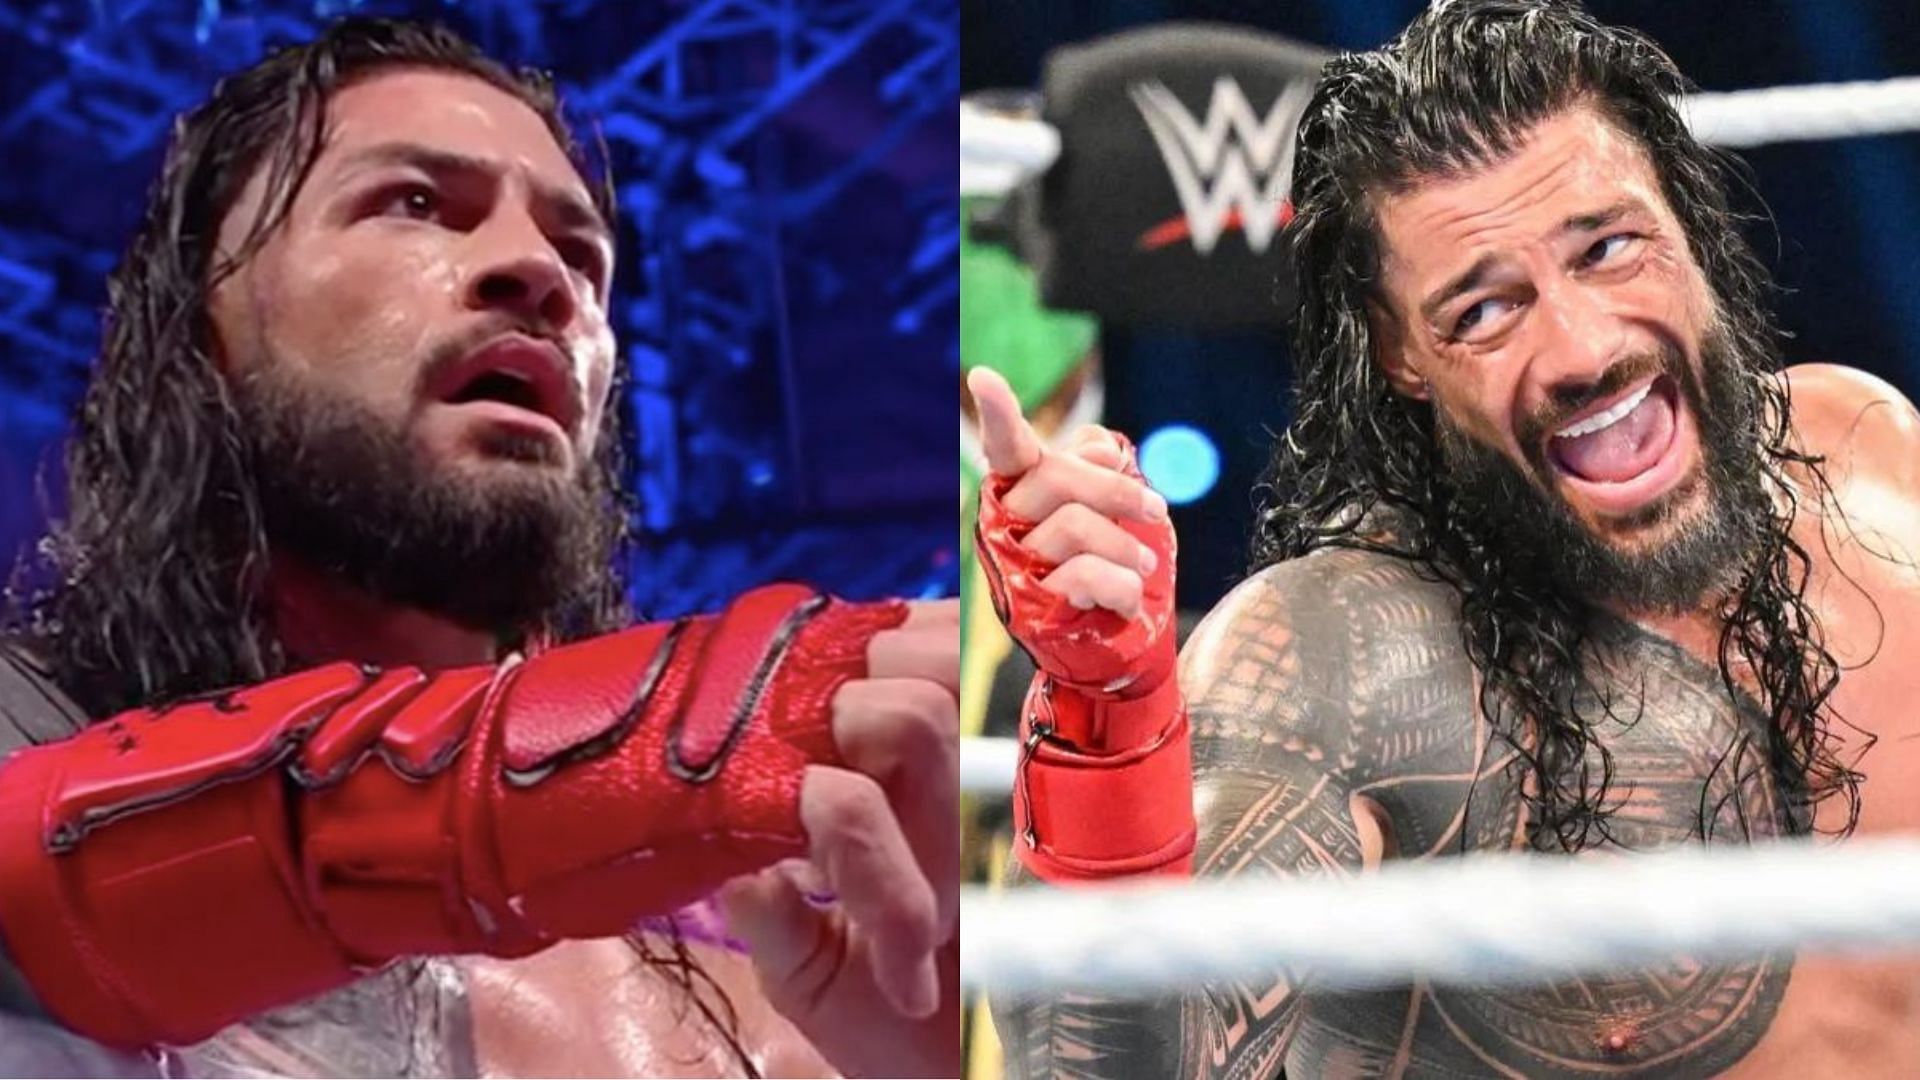 Roman Reigns was betrayed by Jey Uso